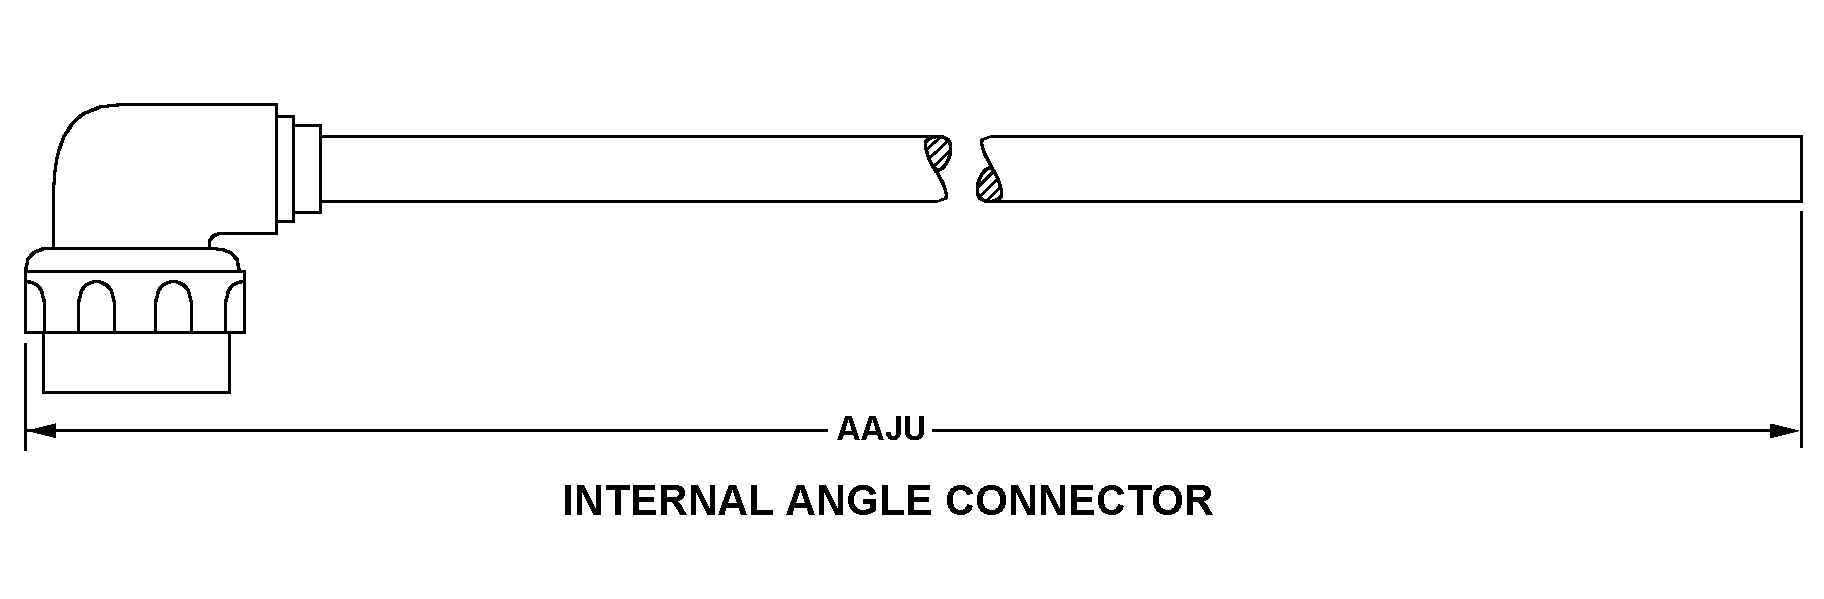 INTERNAL ANGLE CONNECTOR style nsn 6150-01-212-8710